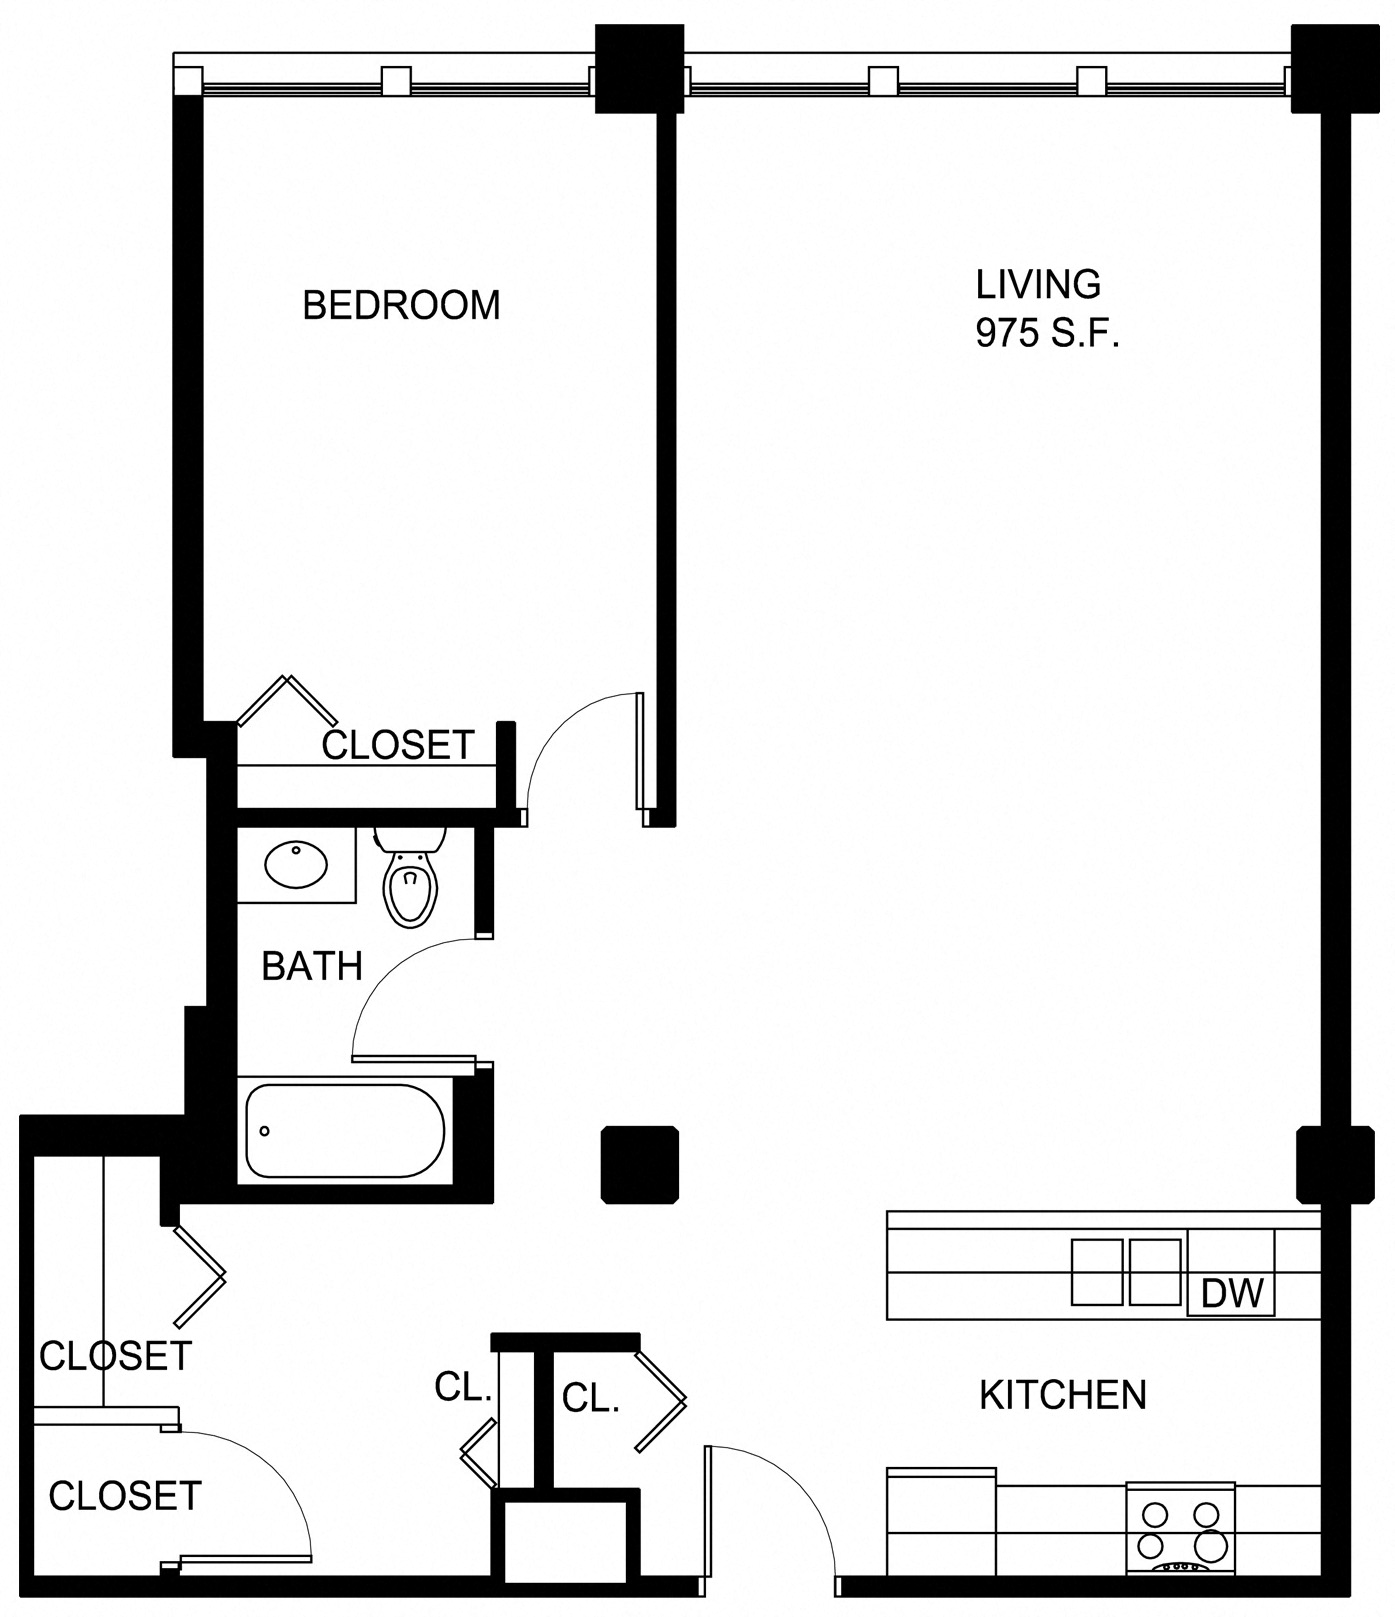 Floorplan for Apartment #P215, 1 bedroom unit at Halstead Providence